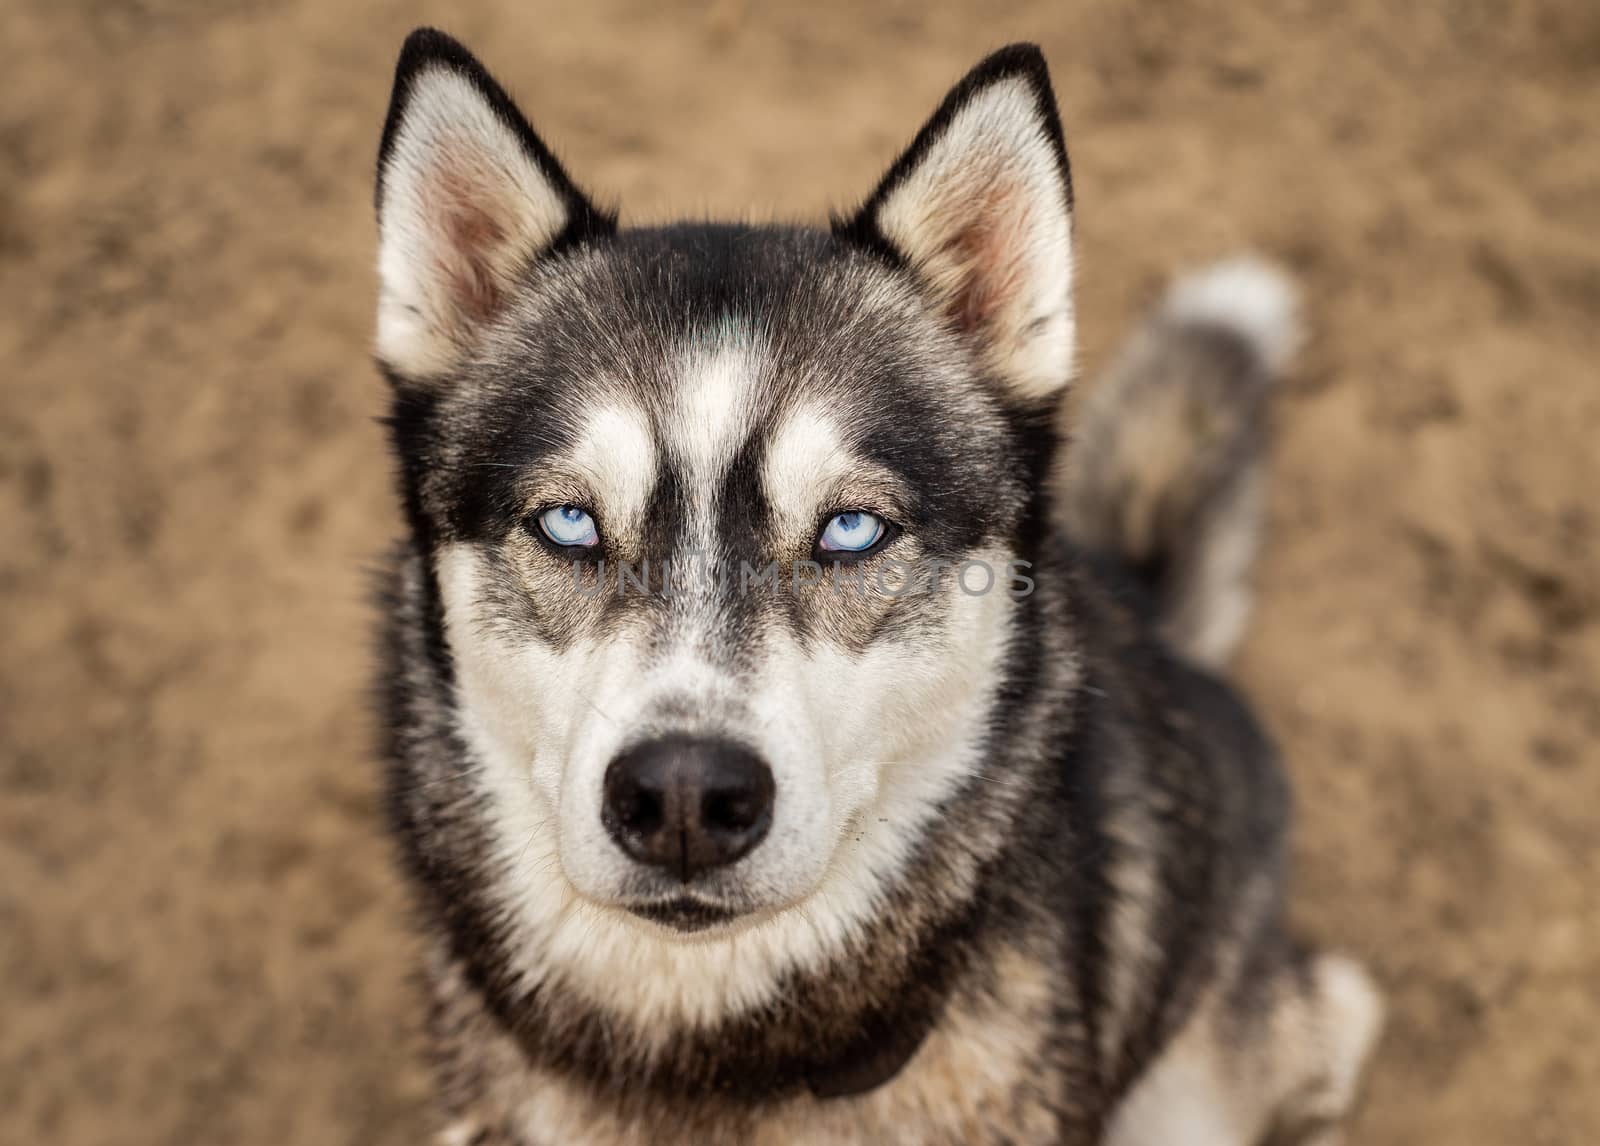 Beautiful husky dog with icy bright blue eyes looks up at the camera with a simple, minimalist, isolated dirt background. by Pendleton